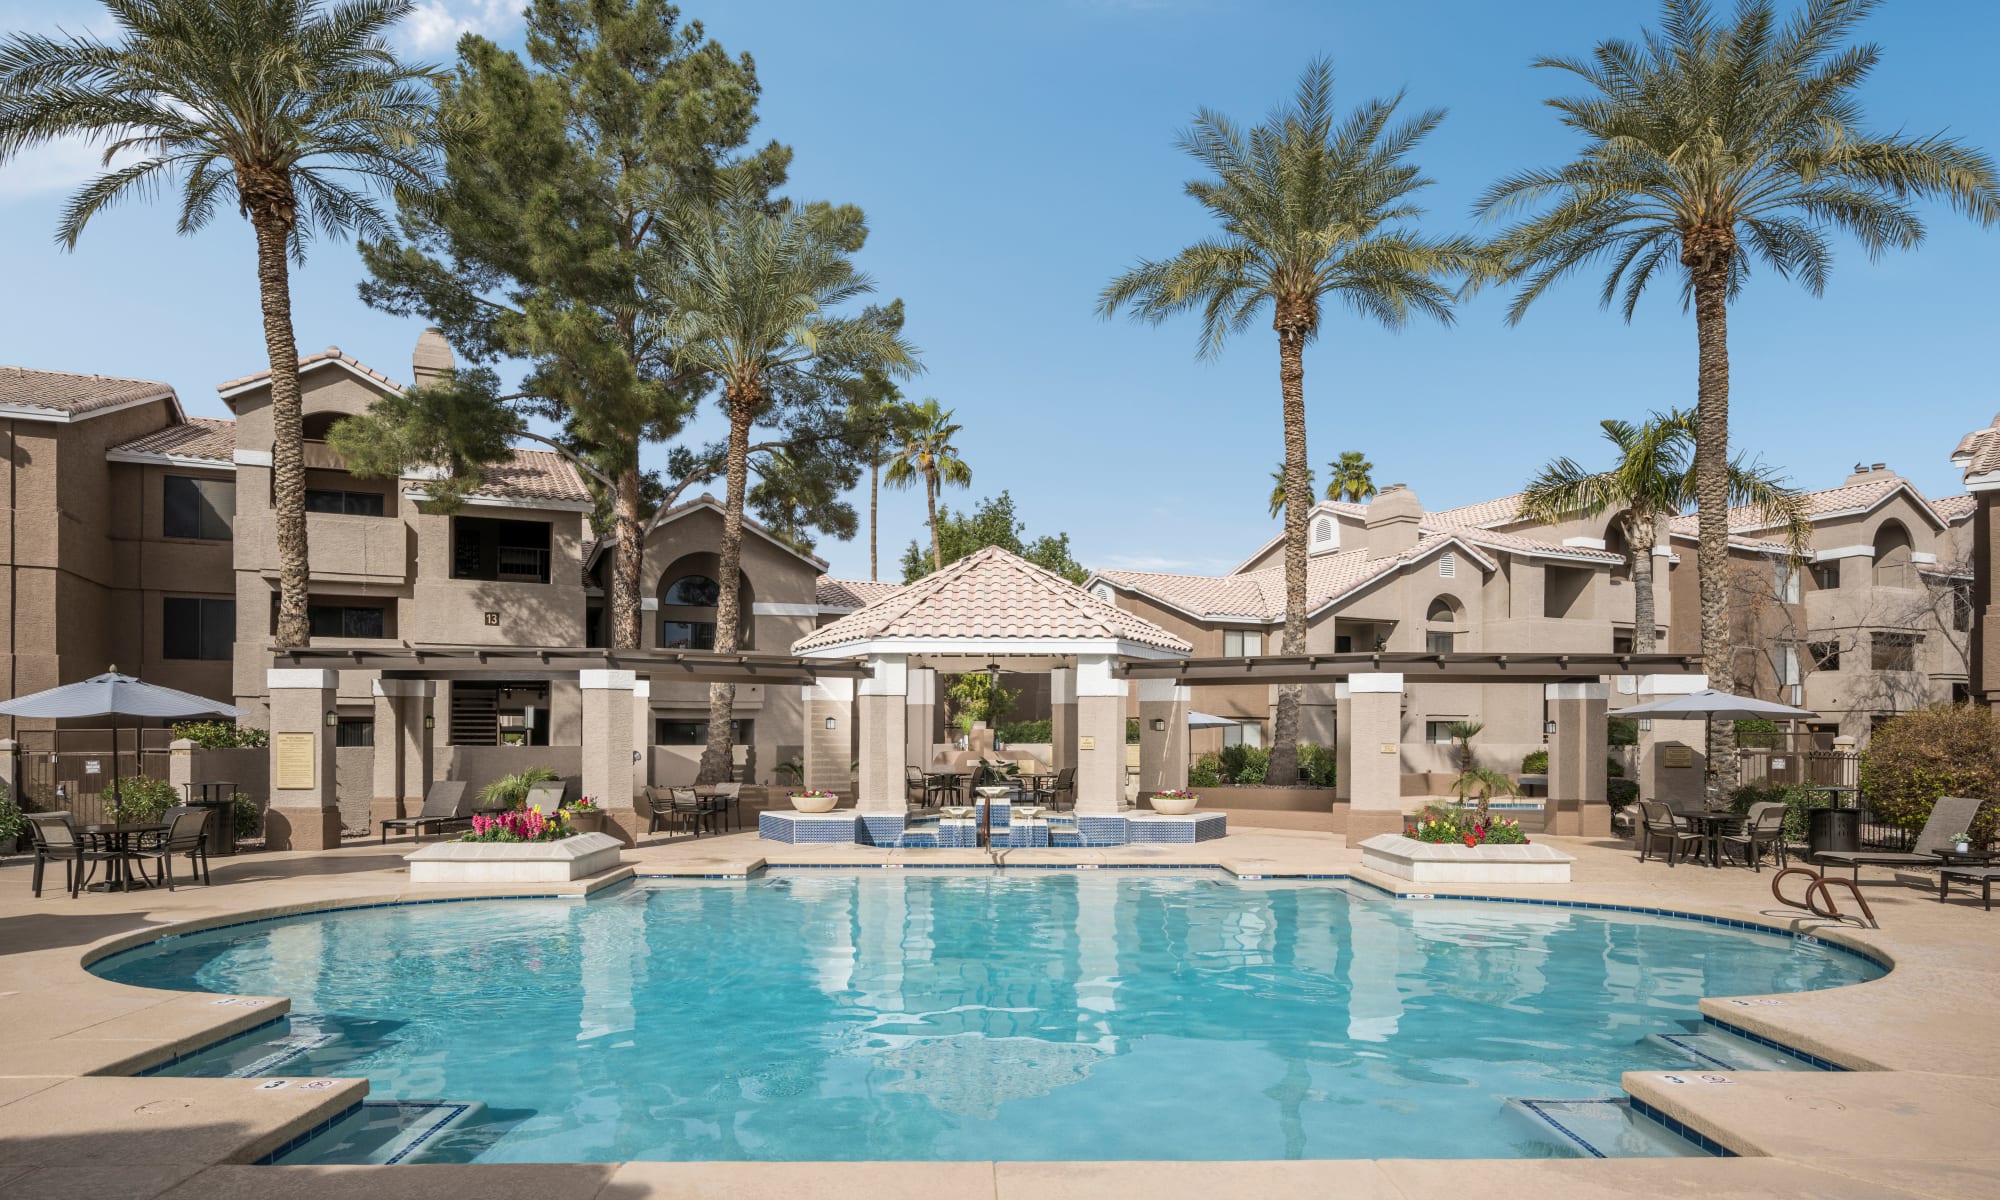 Apartments at The Palisades in Paradise Valley in Phoenix, Arizona 